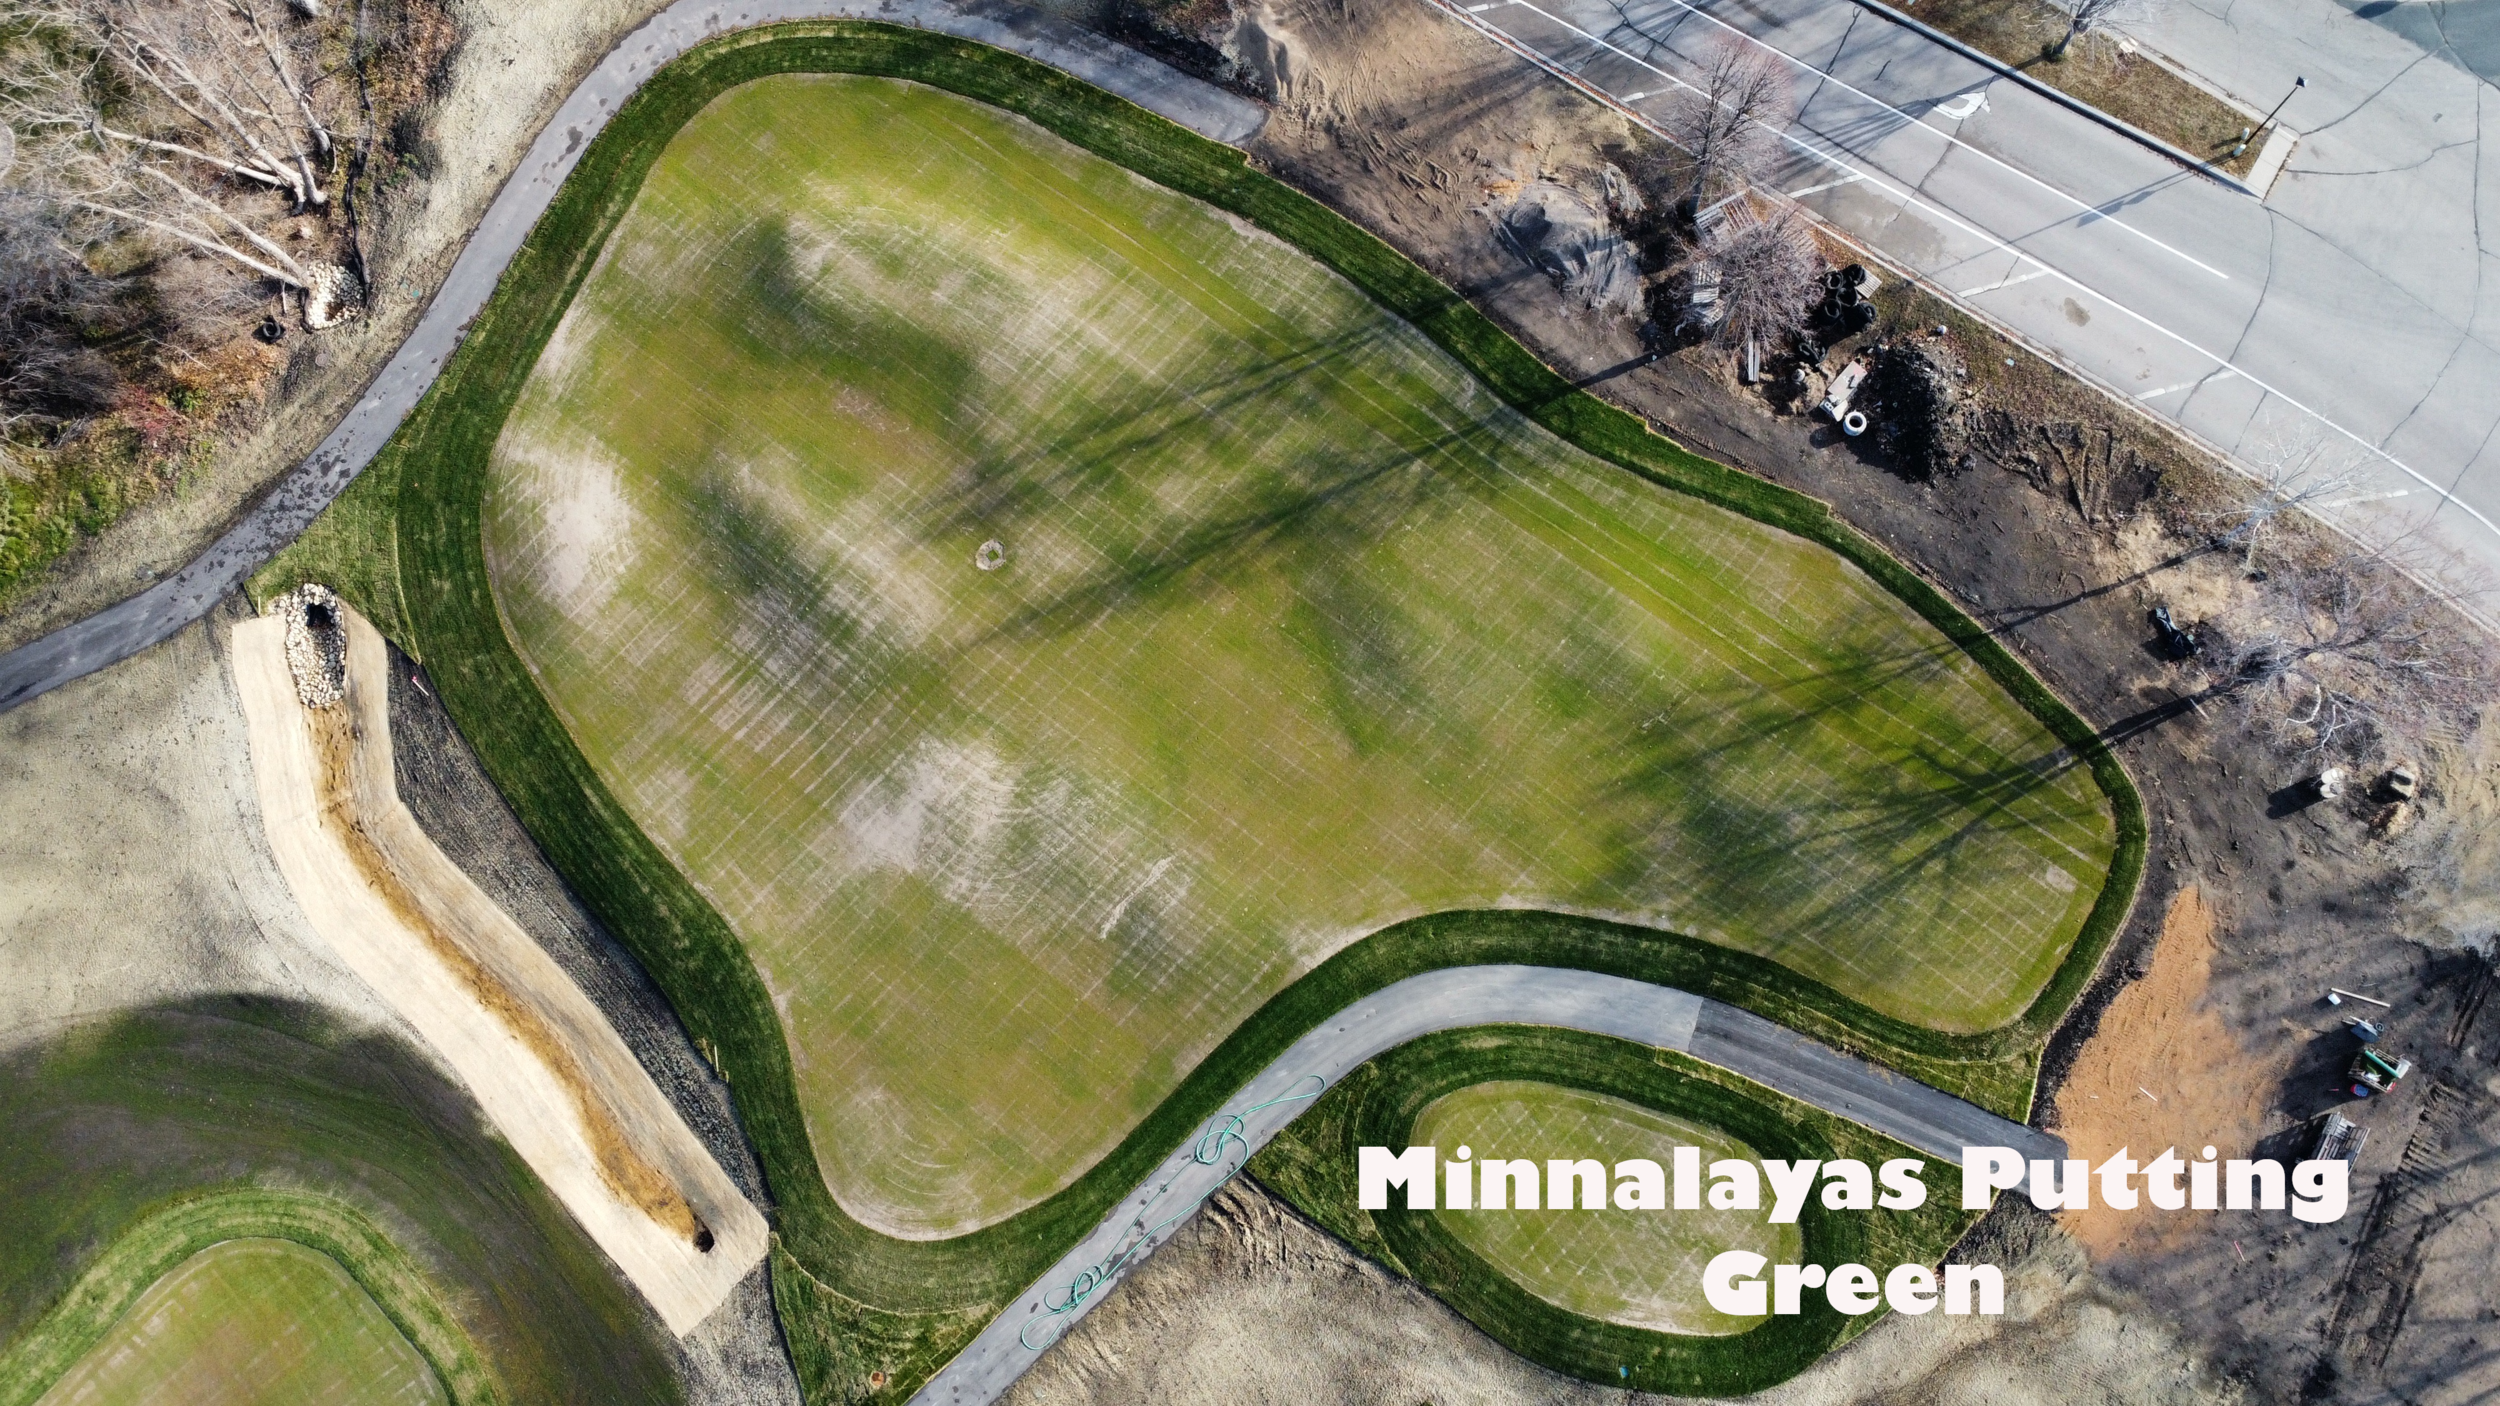  Minnalayas Putting Course | 30,000 square feet | Open to the Public Green Shaped by Jonathan Reisetter  How much fun are you willing to have? Backing up to Hazeltine Bvld., this putting course is easy to get to and open to the public. The countours 